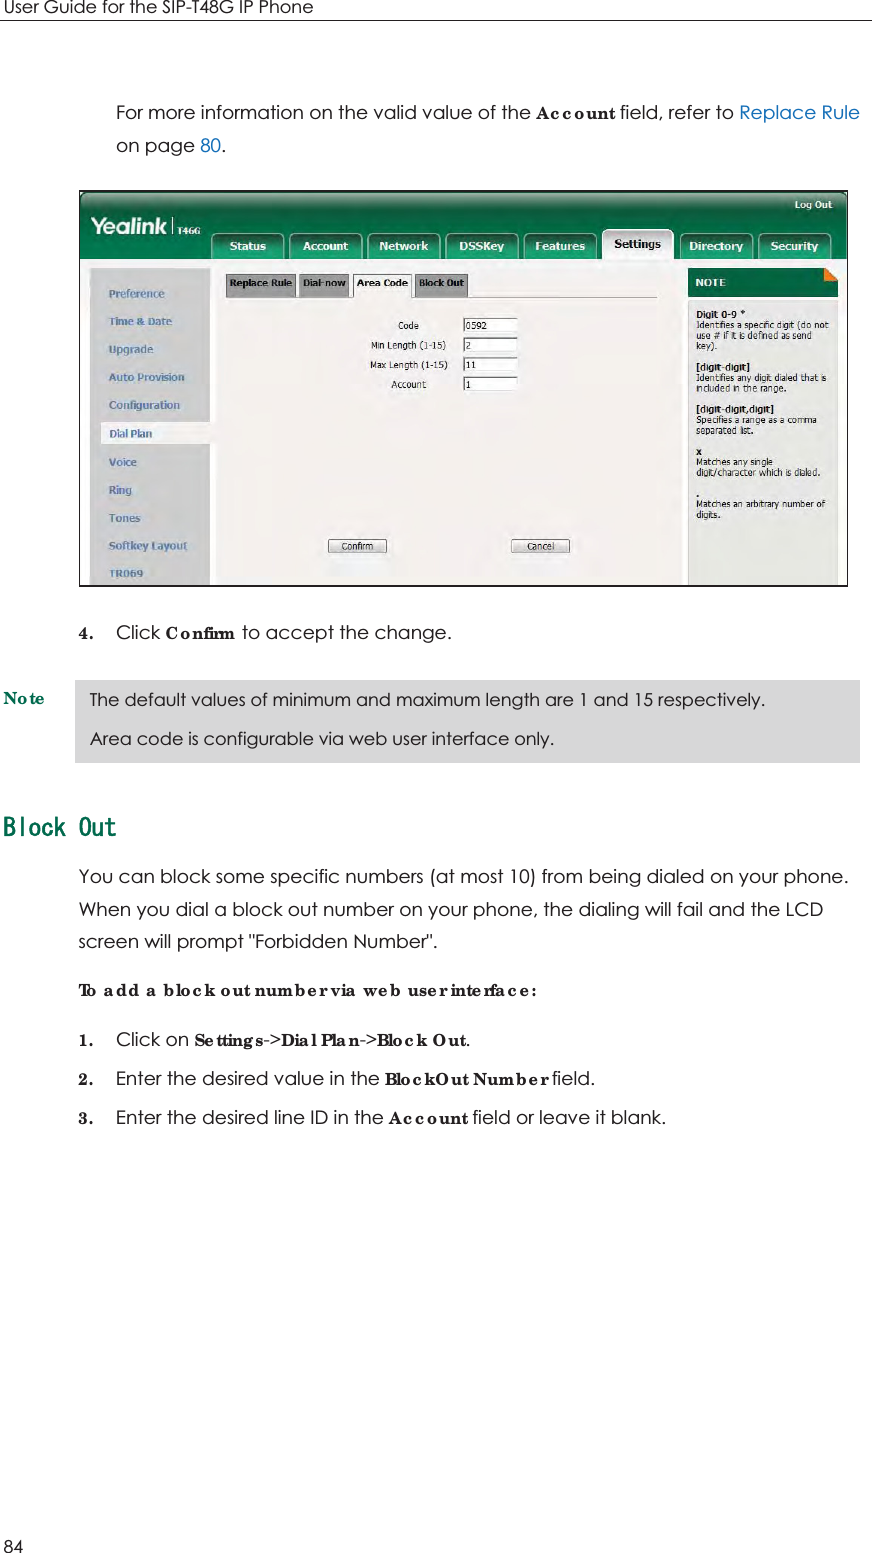 User Guide for the SIP-T48G IP Phone 84  For more information on the valid value of the Account field, refer to Replace Rule on page 80.  4. Click Confirm to accept the change. Note    $NQEM1WVYou can block some specific numbers (at most 10) from being dialed on your phone. When you dial a block out number on your phone, the dialing will fail and the LCD screen will prompt &quot;Forbidden Number&quot;. To add a block out number via web user interface: 1. Click on Settings-&gt;Dial Plan-&gt;Block Out. 2. Enter the desired value in the BlockOut Number field. 3. Enter the desired line ID in the Account field or leave it blank. The default values of minimum and maximum length are 1 and 15 respectively. Area code is configurable via web user interface only. 